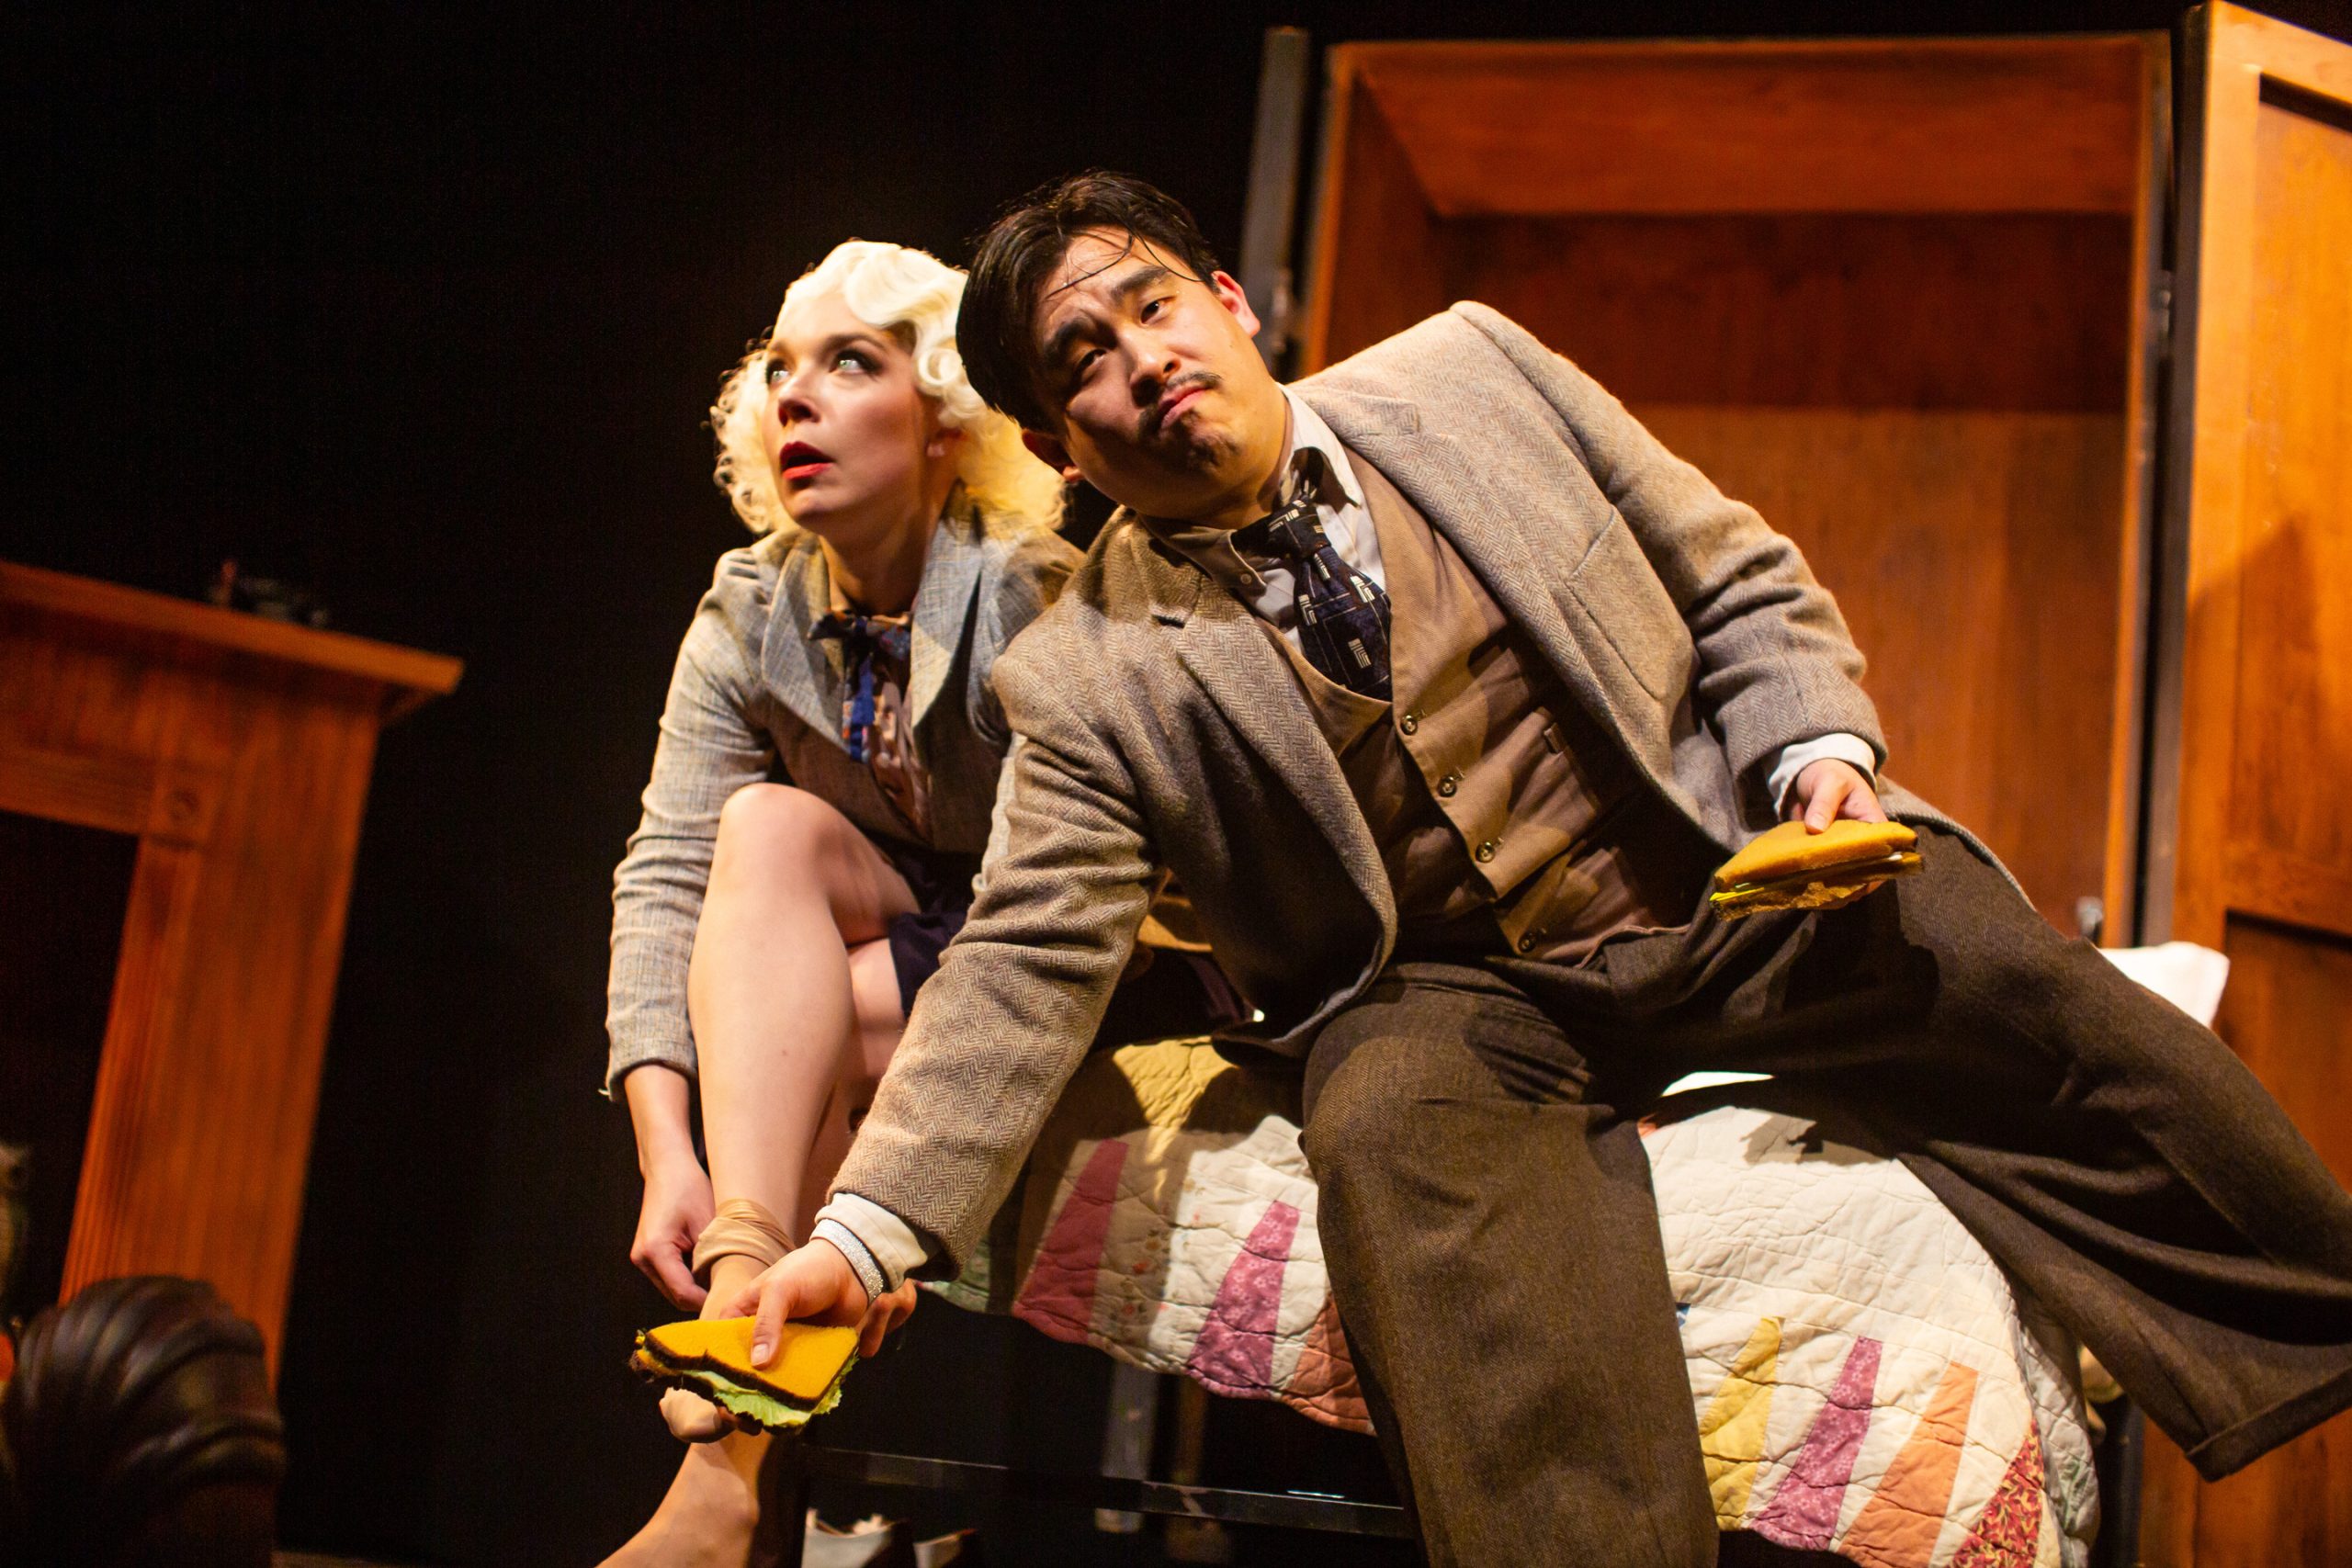 Pamela (Maggie Mason) and Richard Hannay (Phil Wong) struggle with a sandwich in "The 39 Steps," presented by San Francisco Playhouse March 7 - April 20.